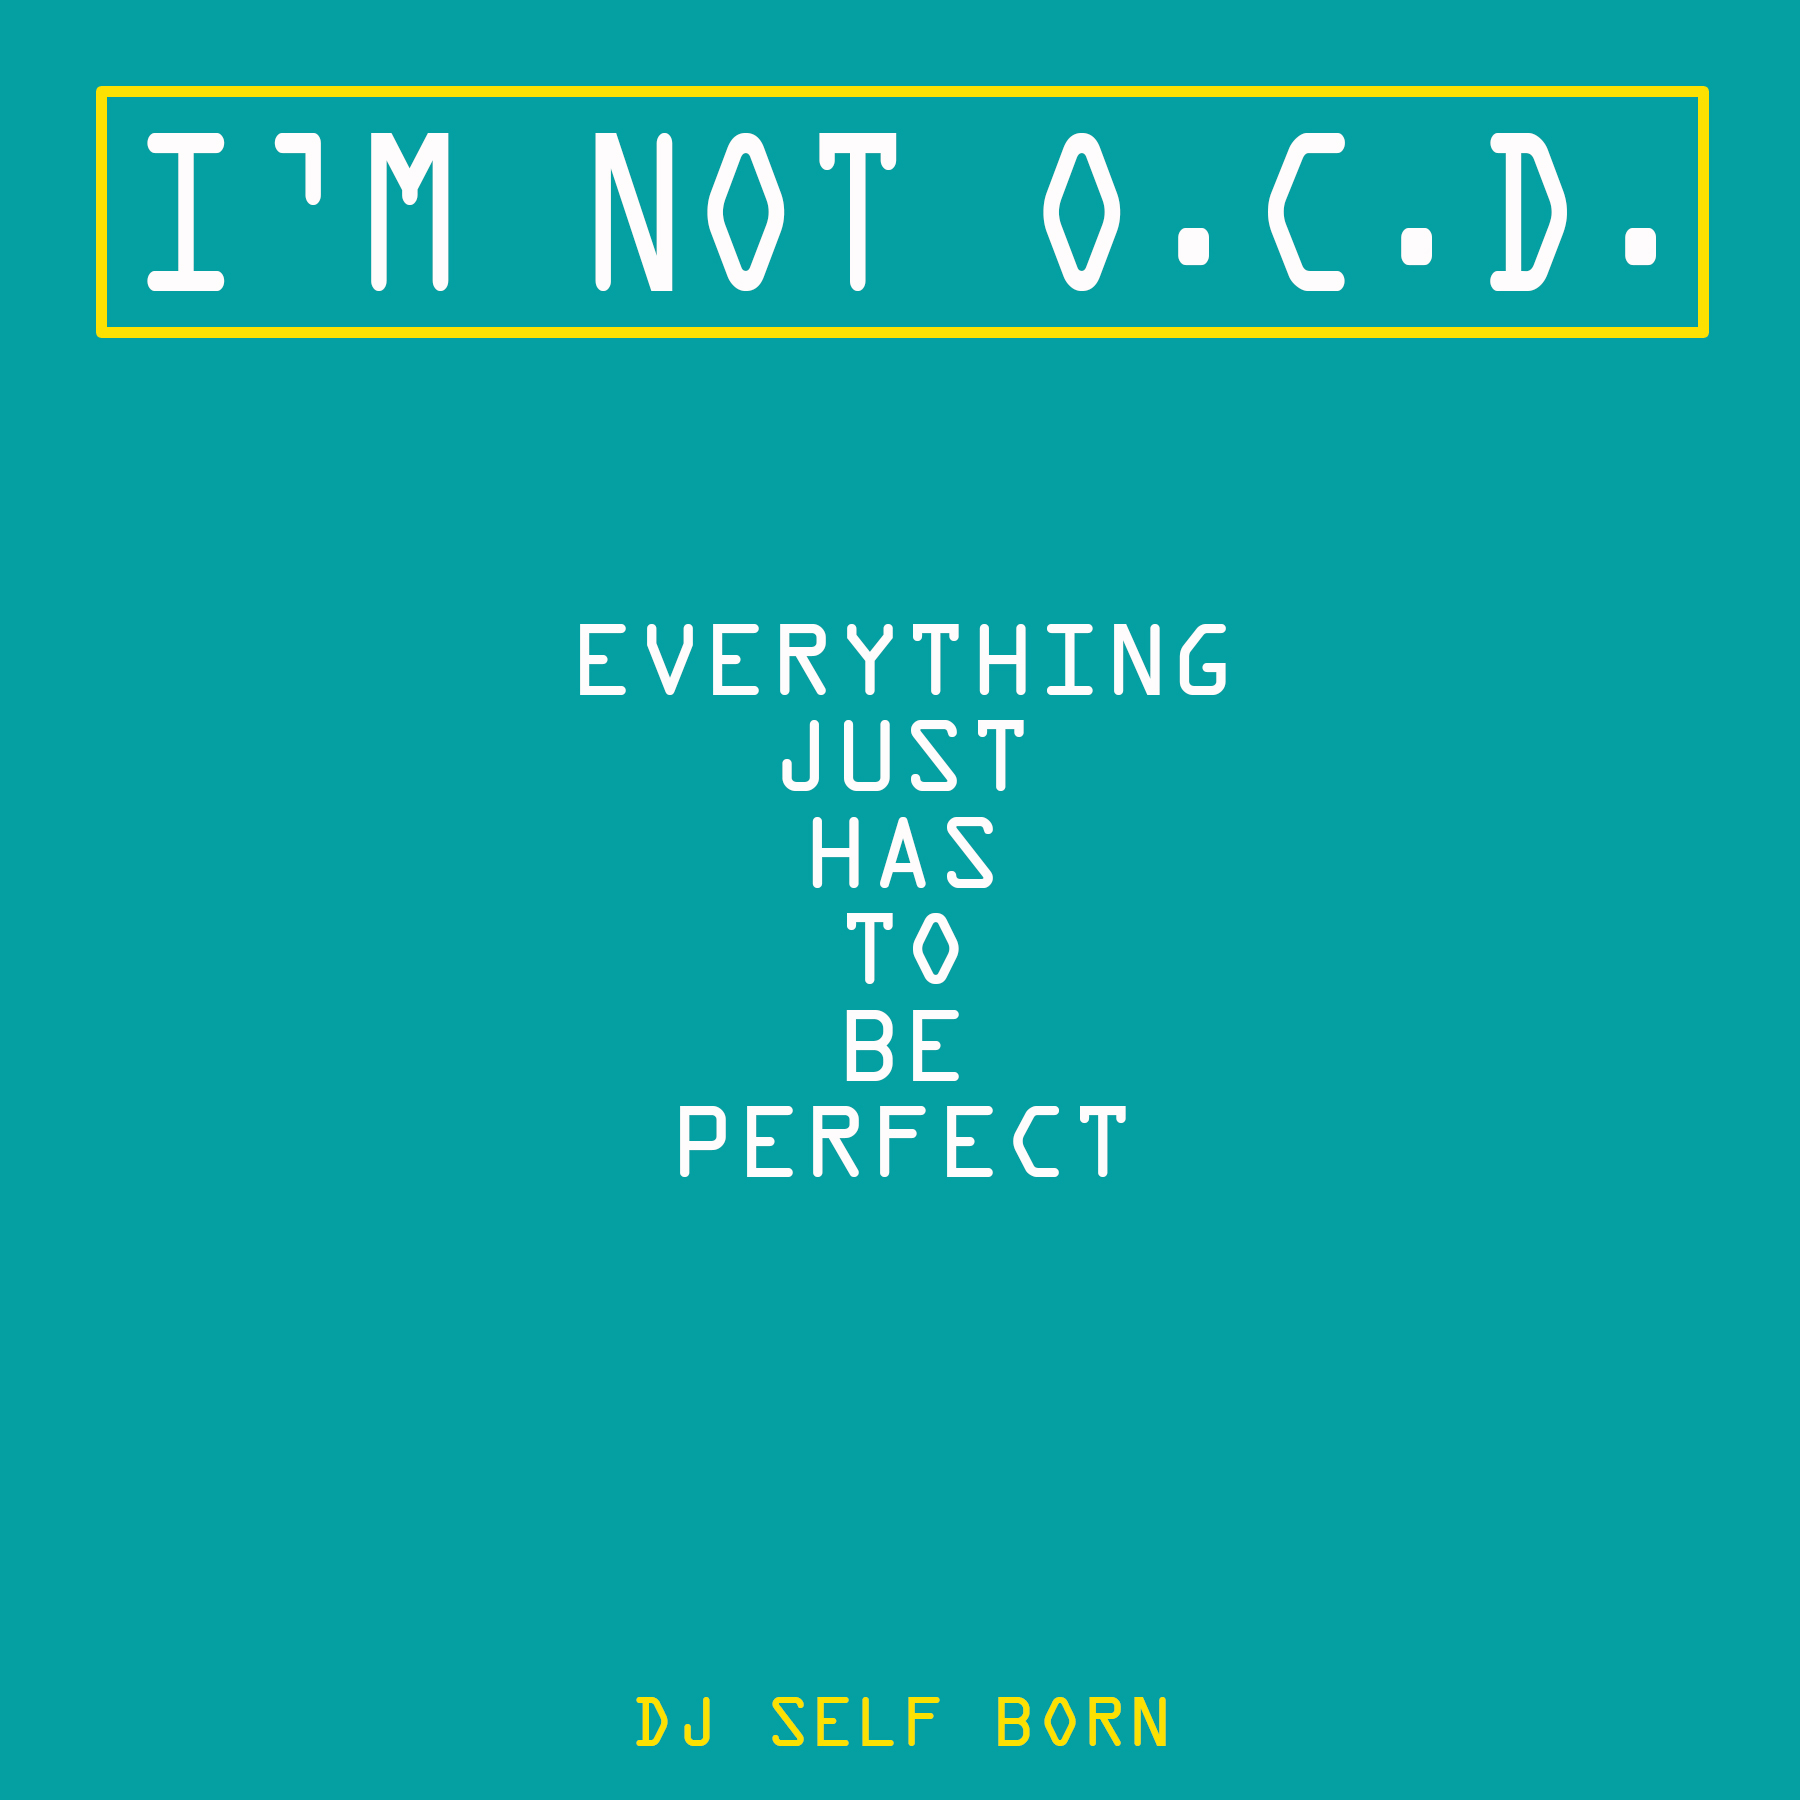 Showing off a reflection of his personality and mindset, Hip-Hop legend ‘DJ Self Born’ inspires fans with his 5th release “I’m Not O.C.D., Everything Just Has To Be Perfect”.